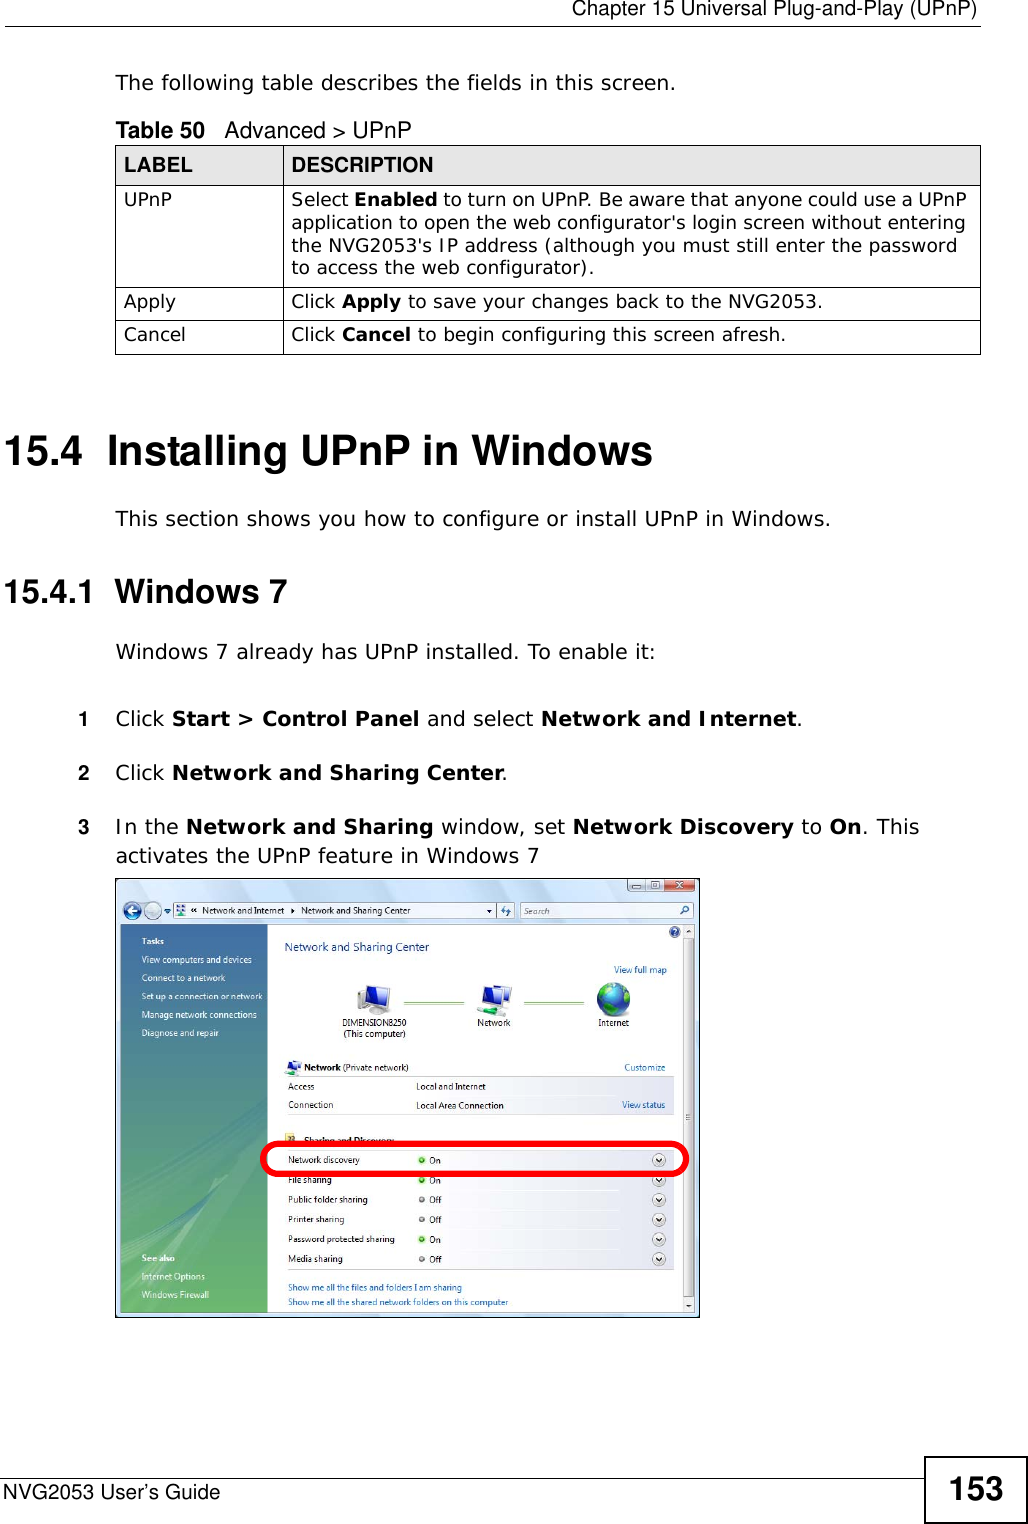  Chapter 15 Universal Plug-and-Play (UPnP)NVG2053 User’s Guide 153The following table describes the fields in this screen. 15.4  Installing UPnP in WindowsThis section shows you how to configure or install UPnP in Windows.15.4.1  Windows 7Windows 7 already has UPnP installed. To enable it:1Click Start &gt; Control Panel and select Network and Internet.2Click Network and Sharing Center.3In the Network and Sharing window, set Network Discovery to On. This activates the UPnP feature in Windows 7 Table 50   Advanced &gt; UPnPLABEL DESCRIPTIONUPnP Select Enabled to turn on UPnP. Be aware that anyone could use a UPnP application to open the web configurator&apos;s login screen without entering the NVG2053&apos;s IP address (although you must still enter the password to access the web configurator).Apply Click Apply to save your changes back to the NVG2053.Cancel Click Cancel to begin configuring this screen afresh.